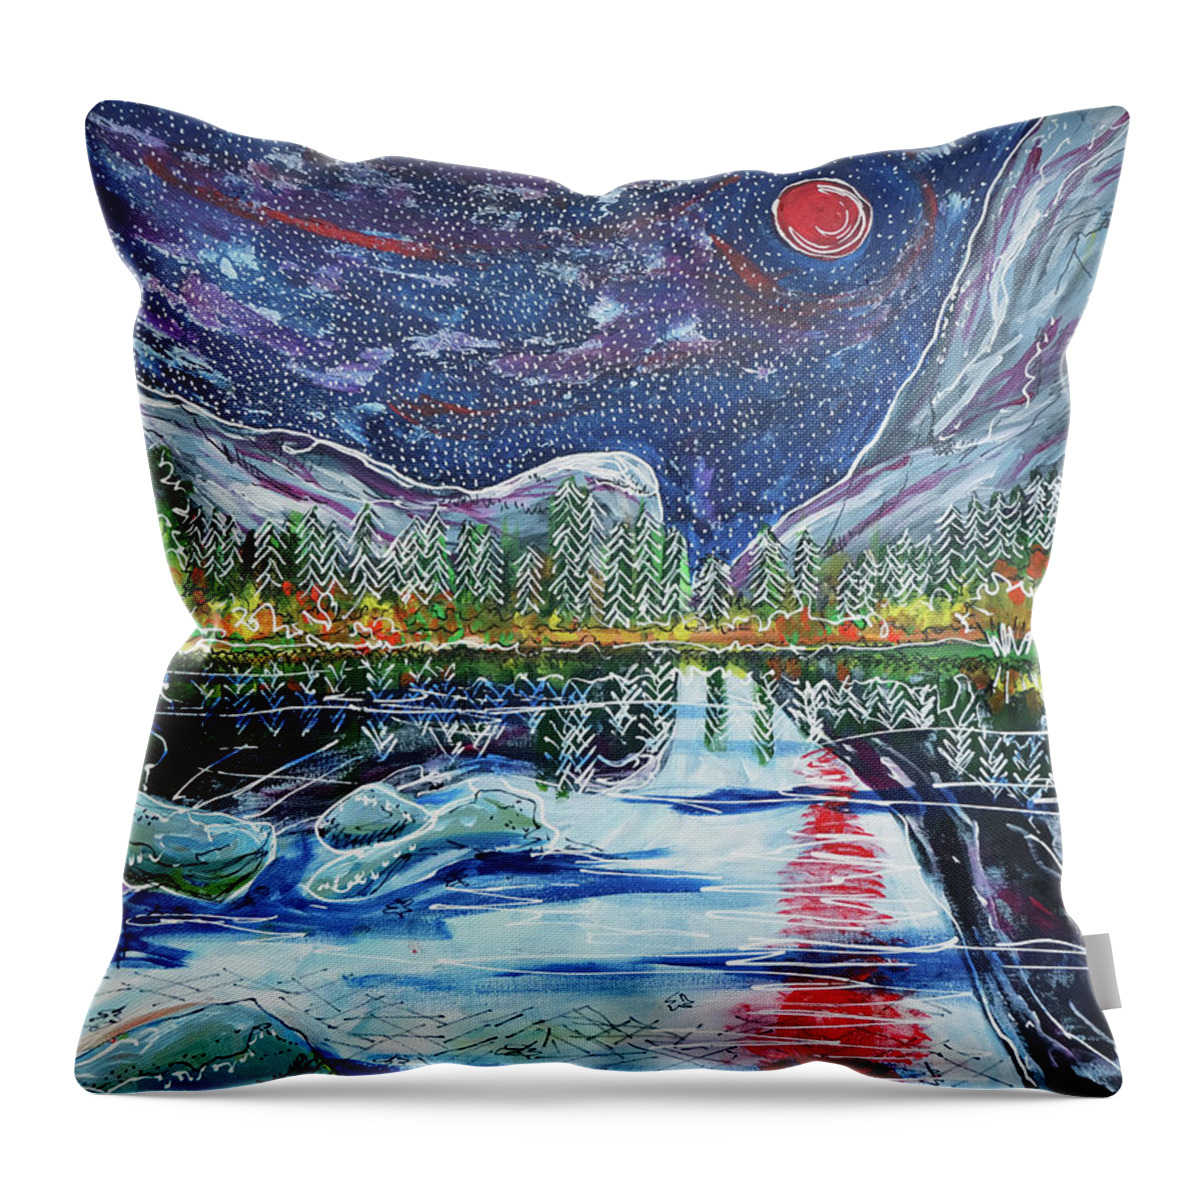 Mirror Lake Throw Pillow featuring the painting Mirror Lake by Laura Hol